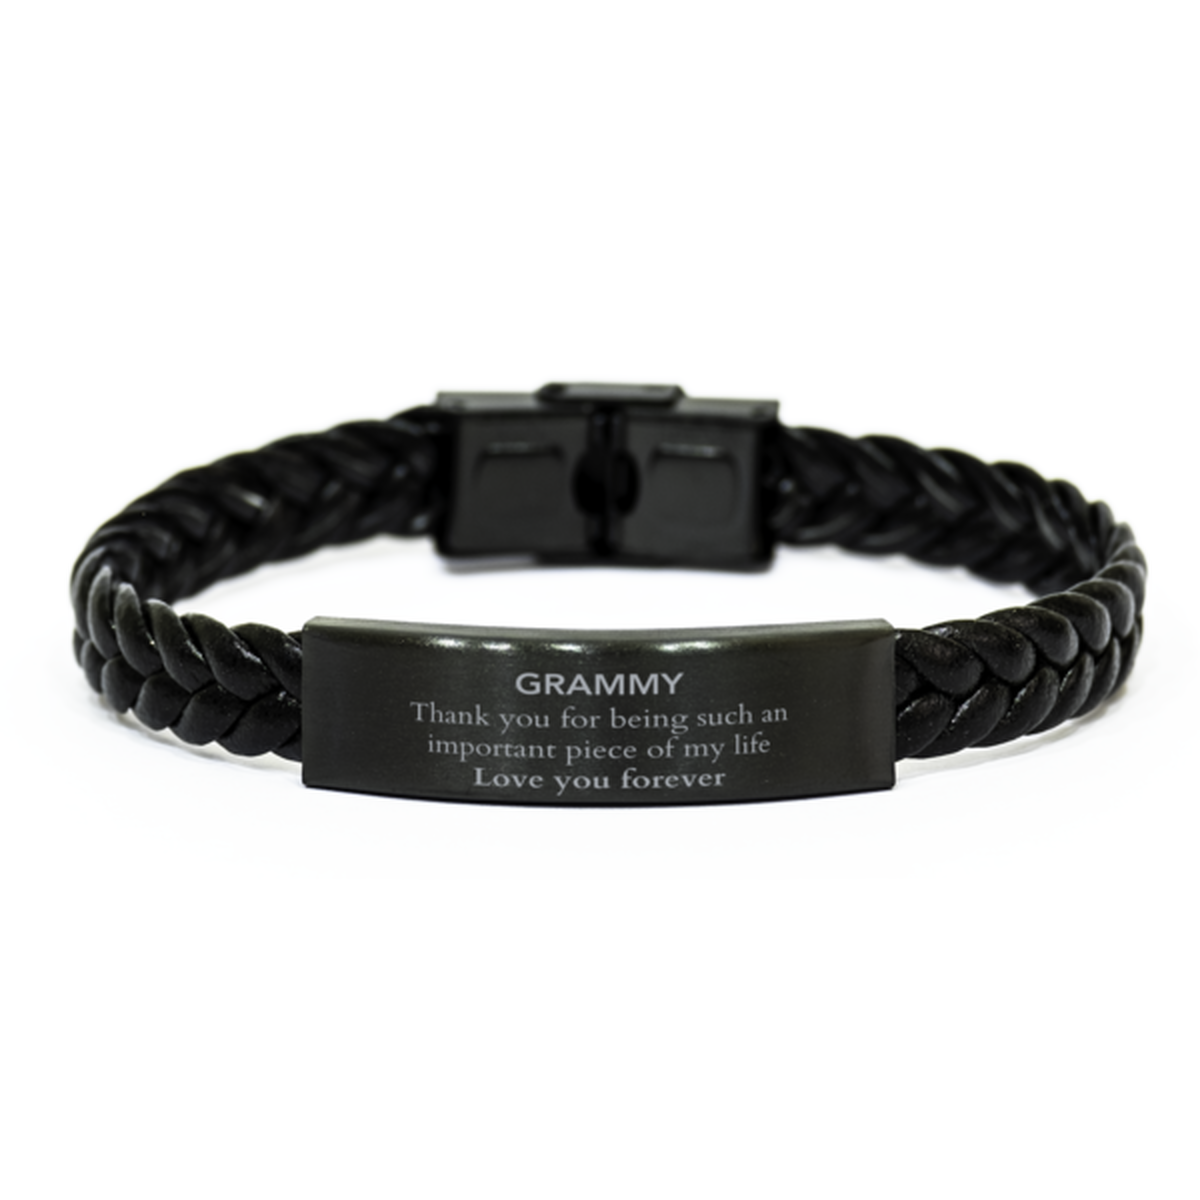 Appropriate Grammy Braided Leather Bracelet Epic Birthday Gifts for Grammy Thank you for being such an important piece of my life Grammy Christmas Mothers Fathers Day